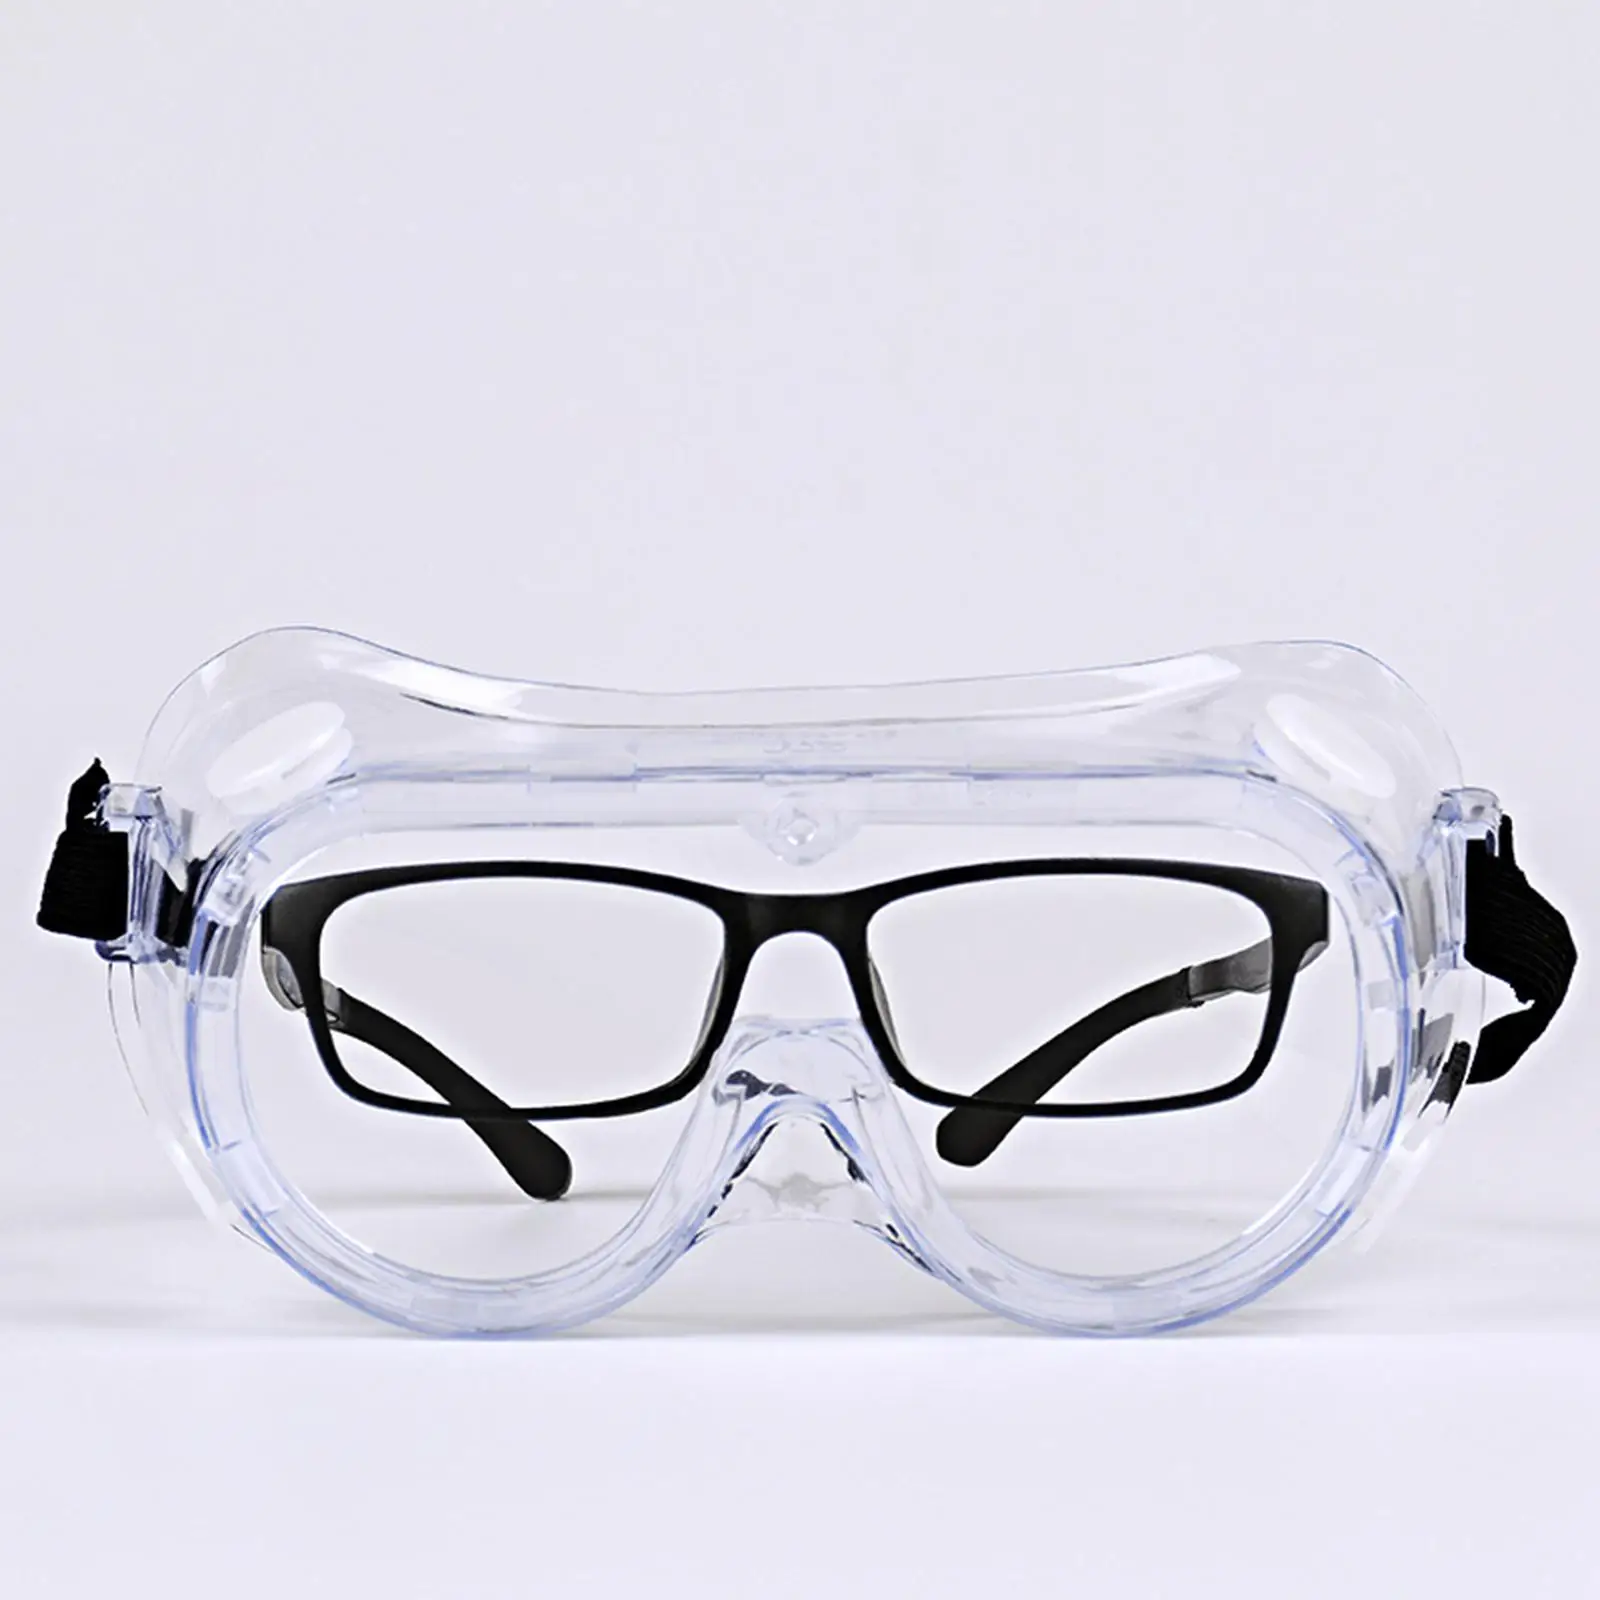 Safety Goggles Glasses, Polycarbonate Lenses Full Eyes /Wind Eyeglasses Anti Scratch/Dust/Fog for Cycling Skiing Cutting Onions